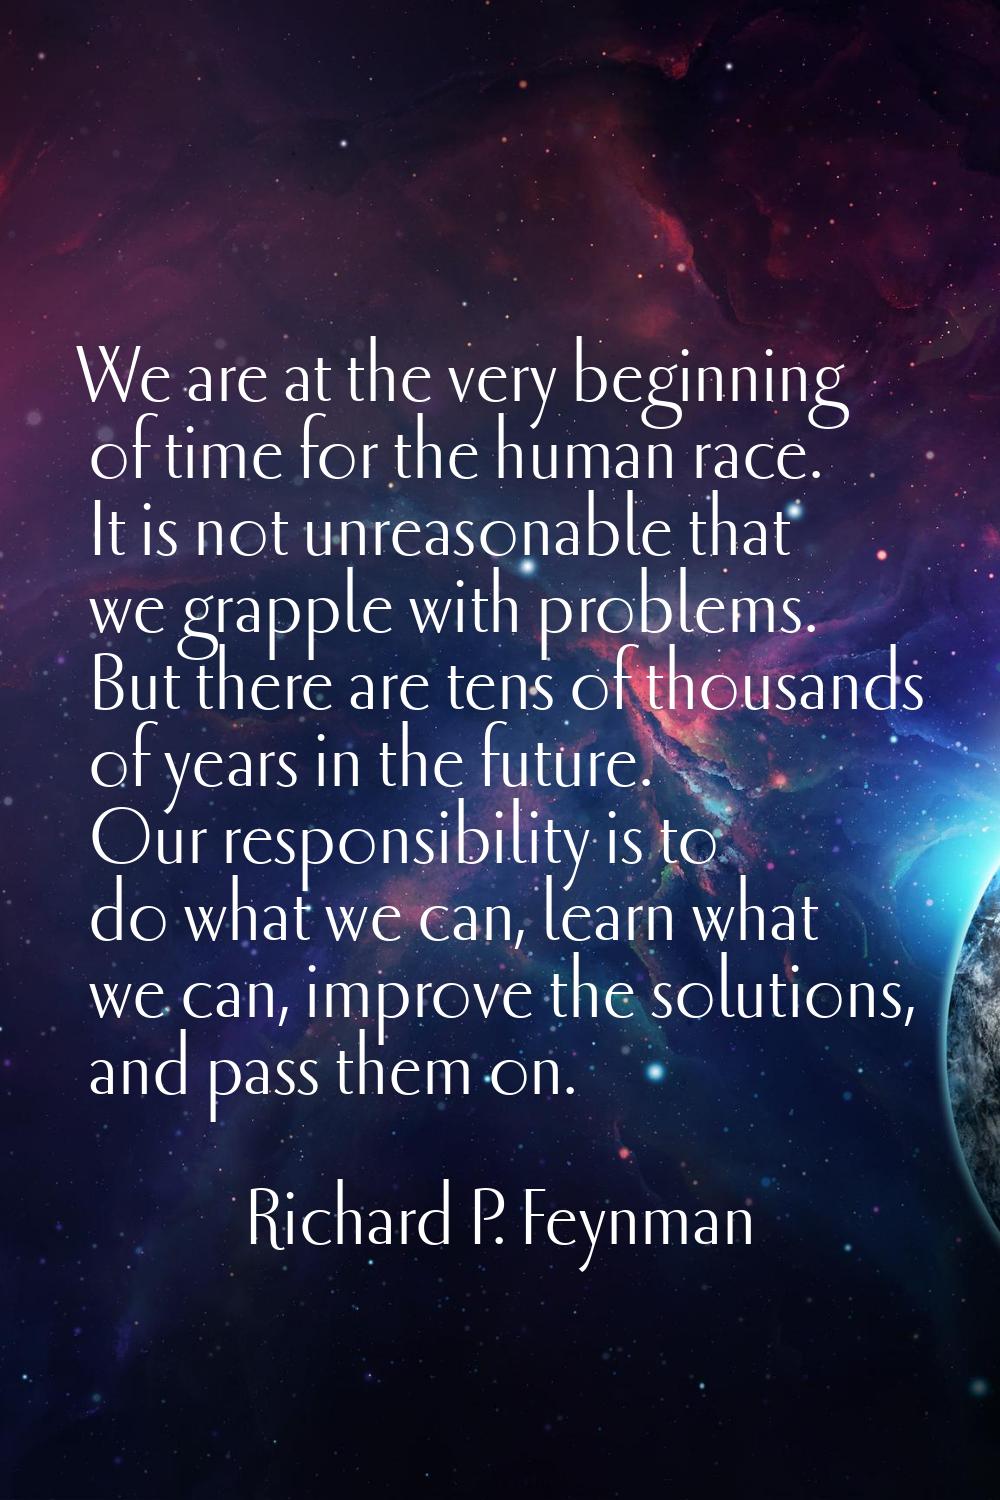 We are at the very beginning of time for the human race. It is not unreasonable that we grapple wit